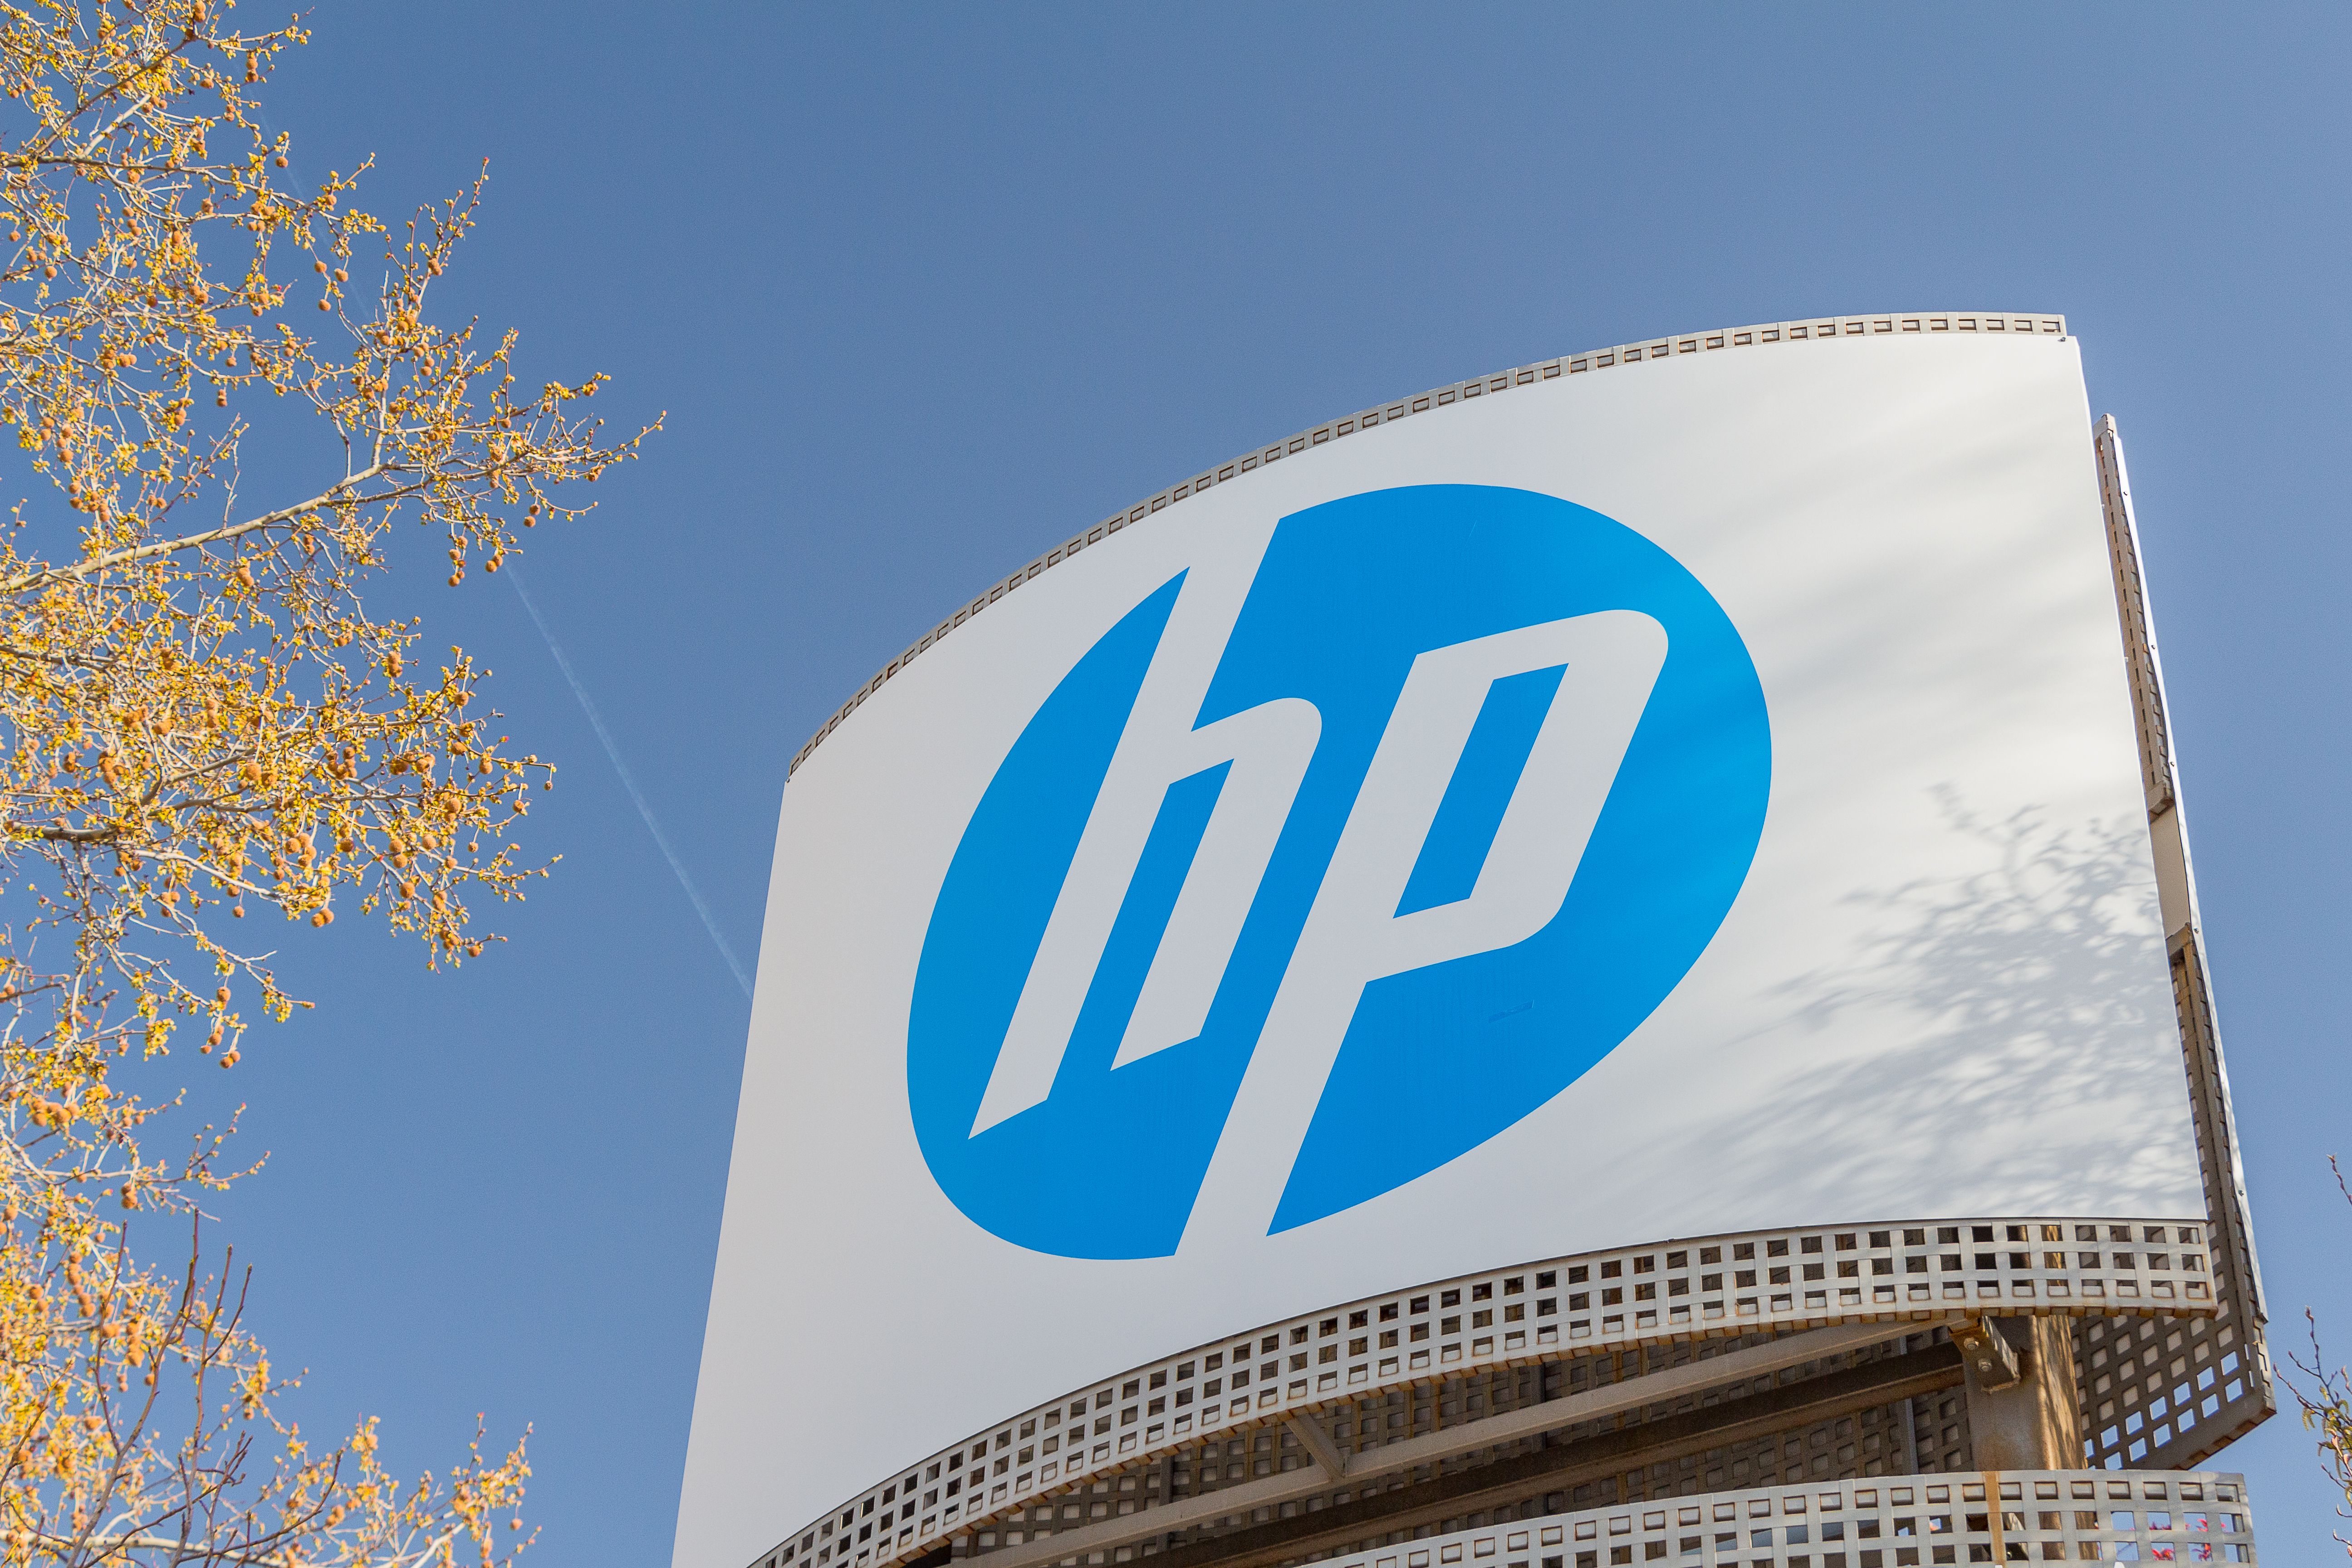 Now HP announces massive layoffs worldwide: it will lay off between 4,000 and 6,000 employees